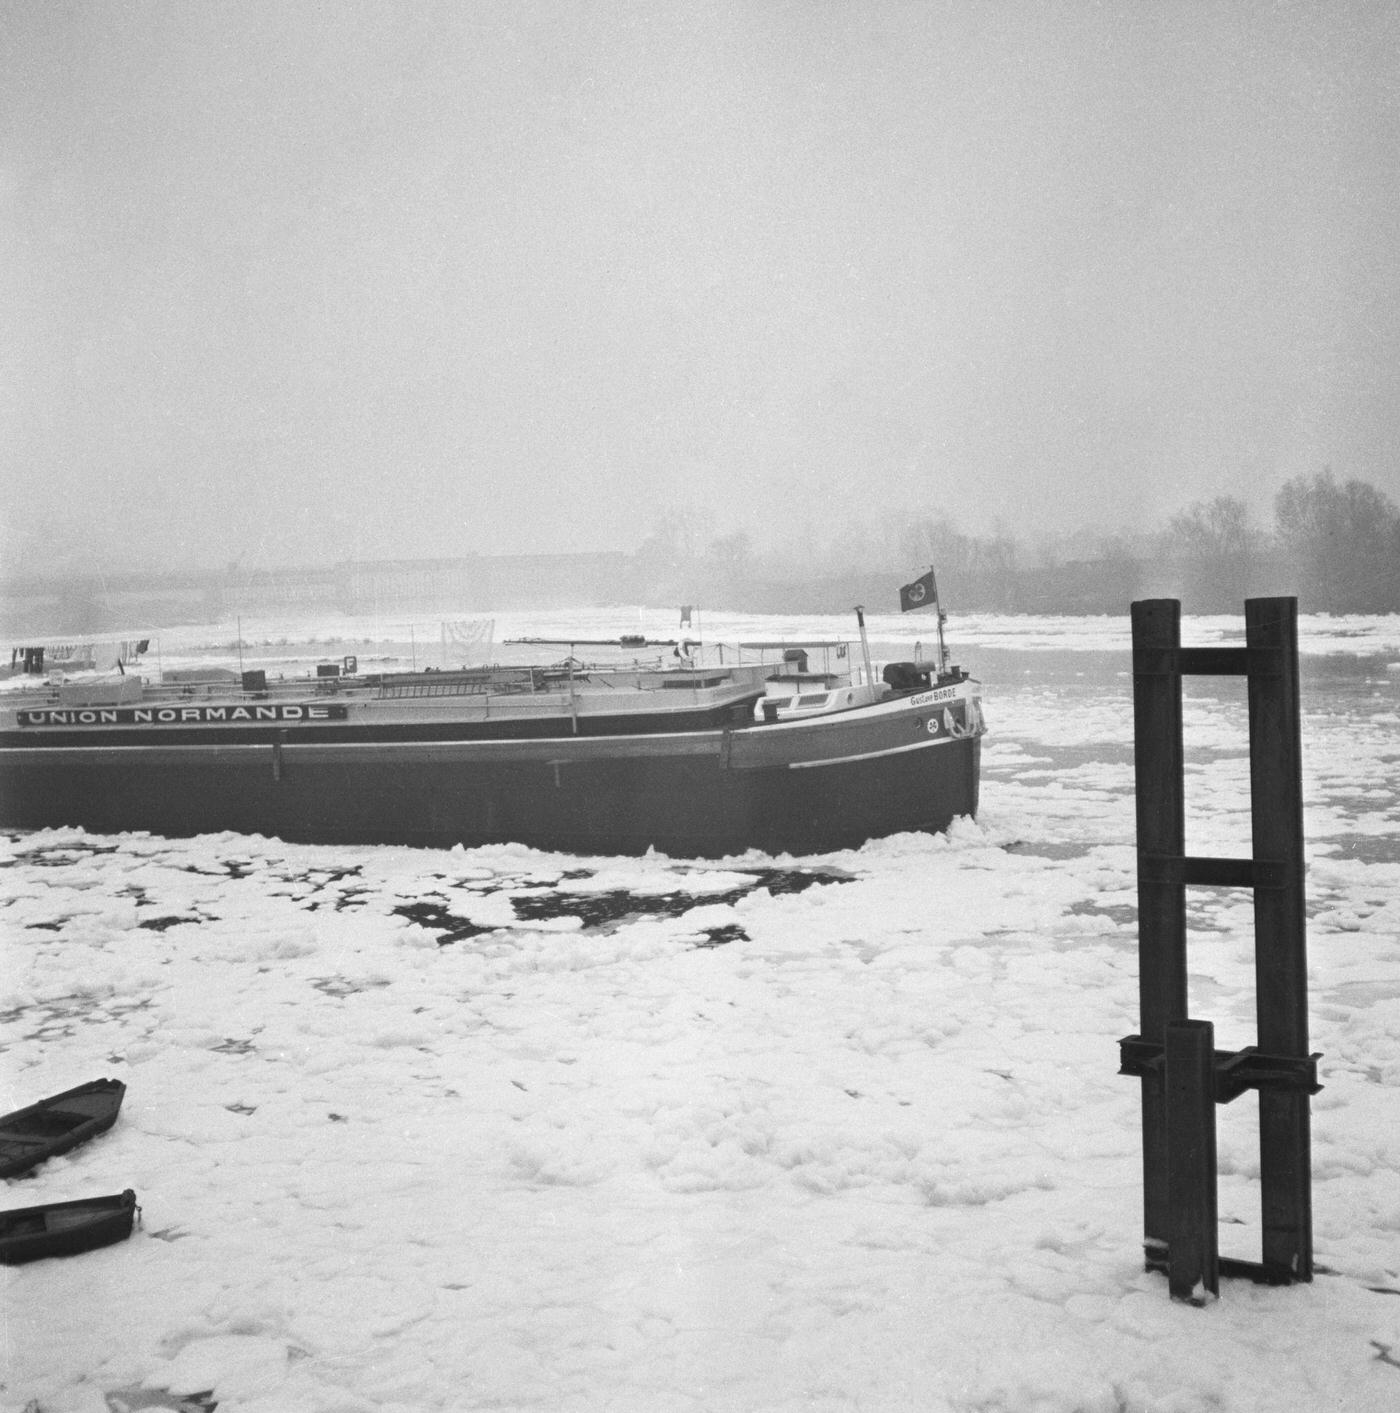 Icy River Seine Covered In Snow, Paris, November 29, 1957.